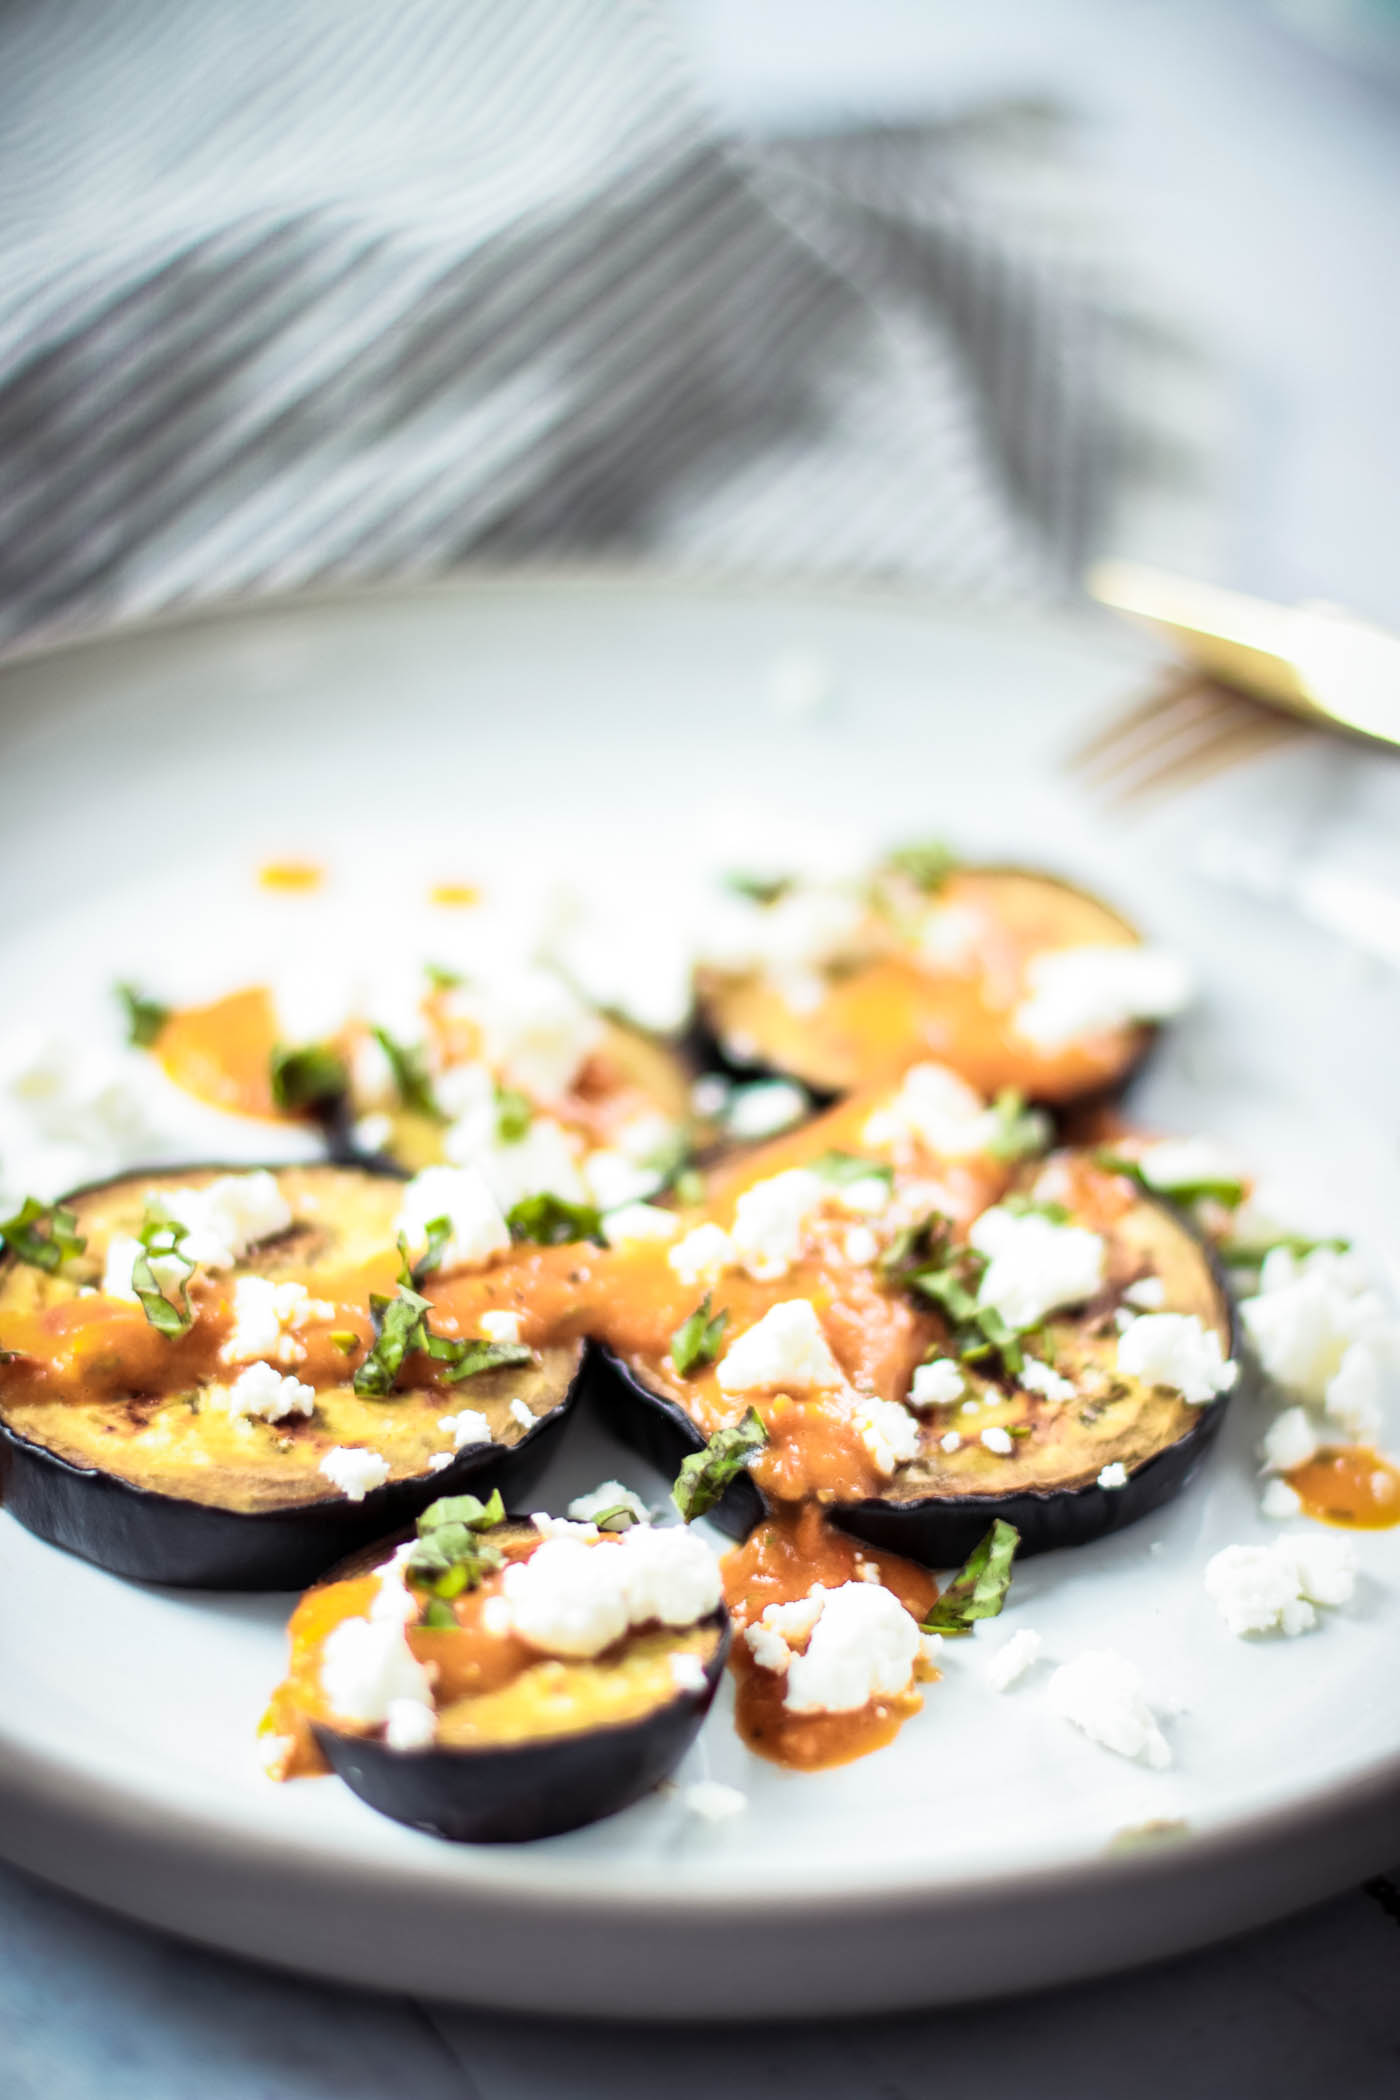 Low-carb lunch: Grilled Eggplant - Gegrillte Aubergine 5